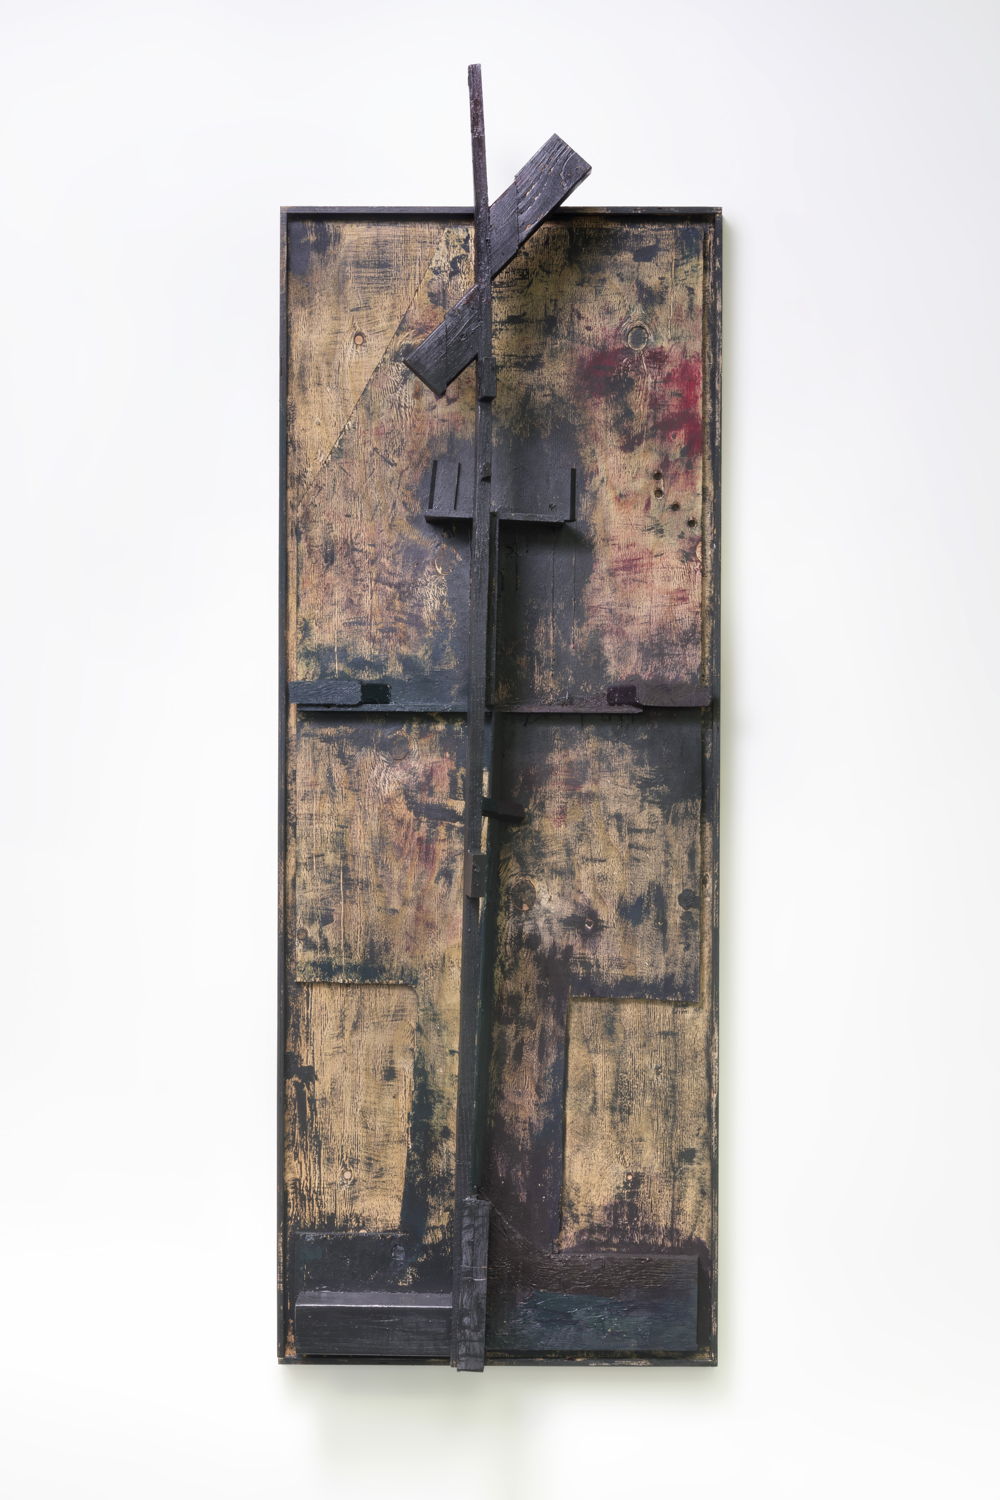 Sterling Ruby, REIF. 7224. 2020, wood and paint, 222.3 x 76.2 x 24.1 cm (87 1⁄2 x 30 x 9 1⁄2 in.) Courtesy the Artist and Xavier Hufkens, Brussels